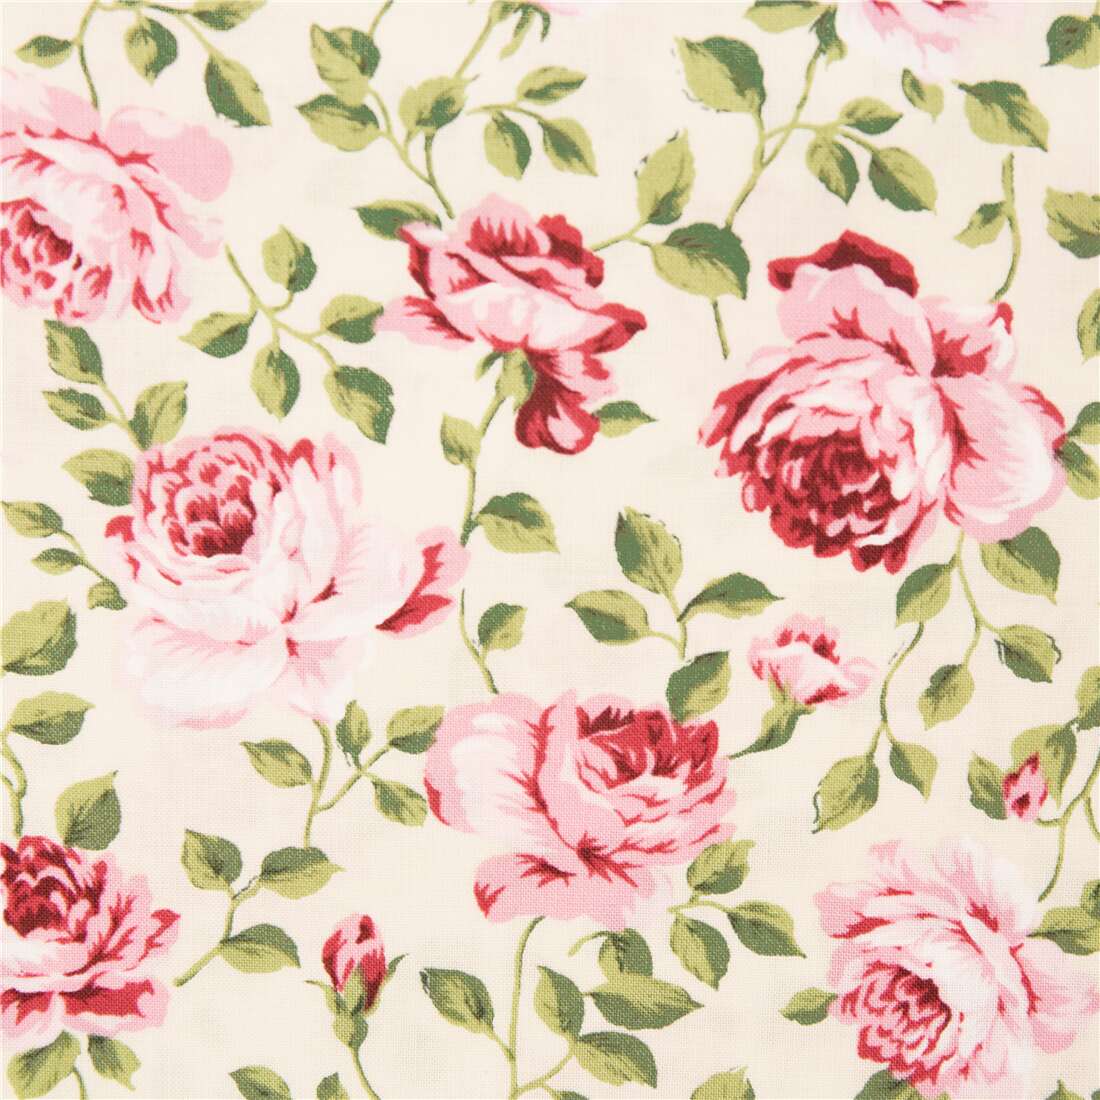 Cream cotton shirting fabric with lush pink roses and trailing foliage ...